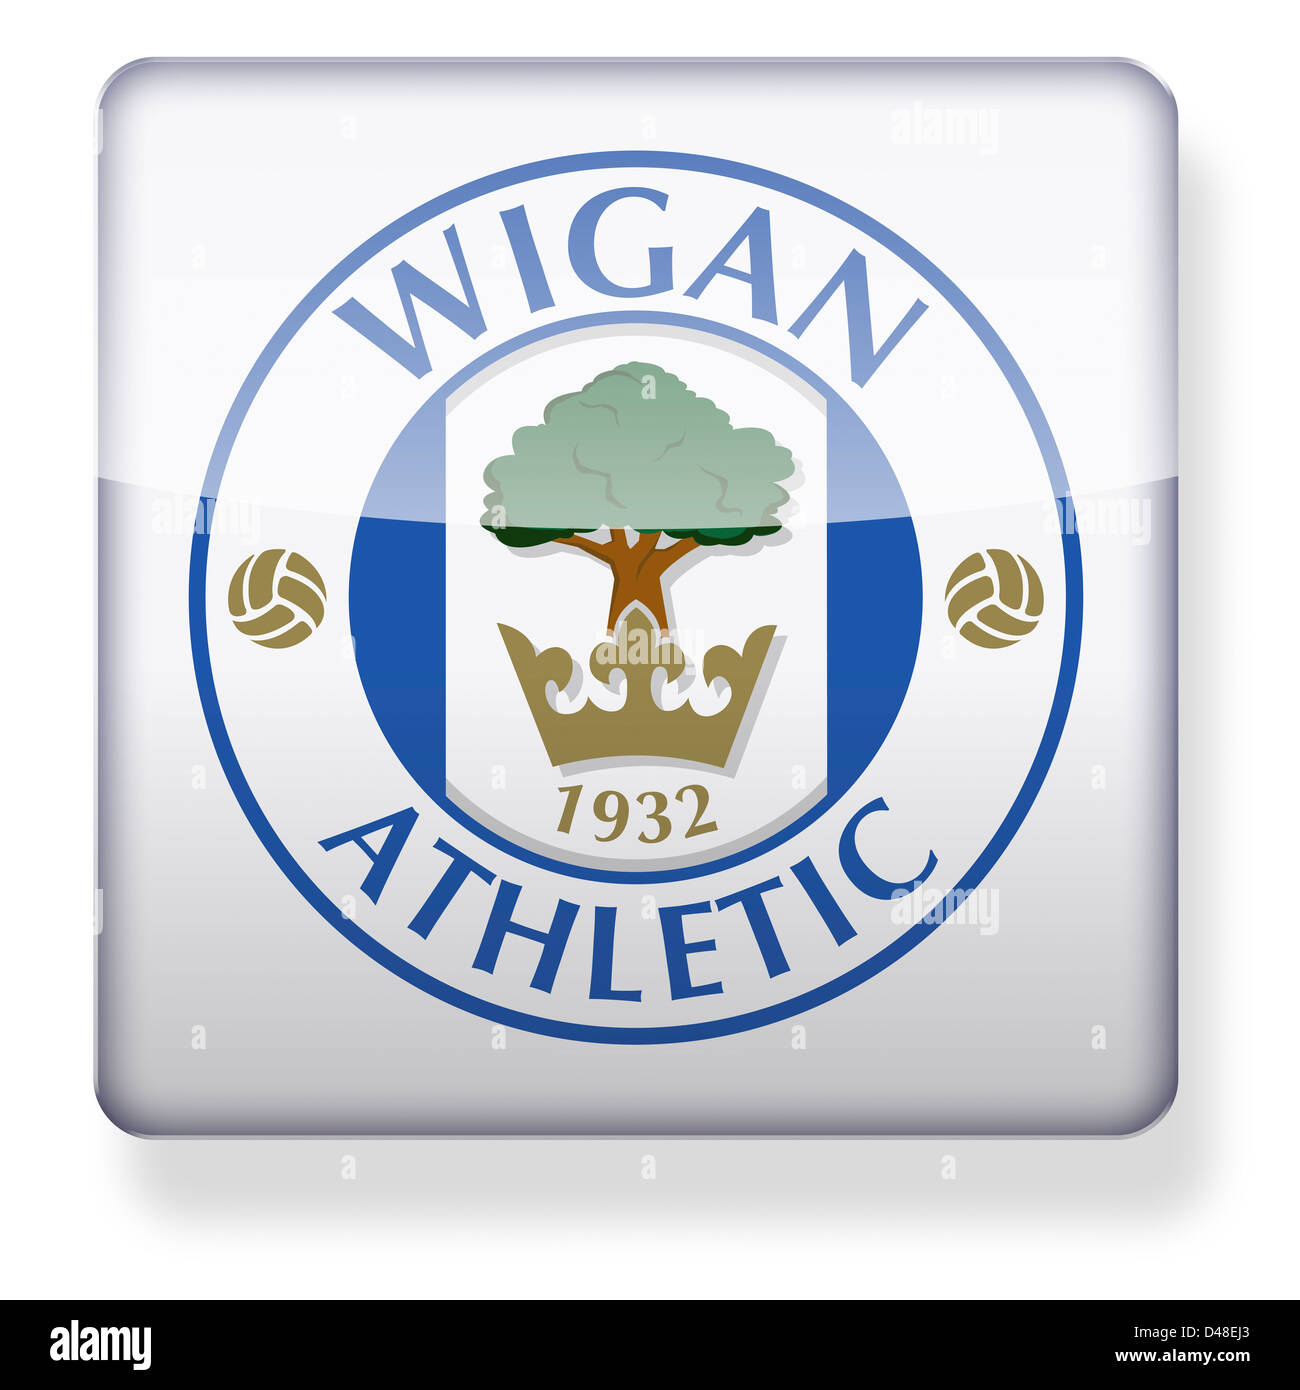 Wigan Athletic football club logo as an app icon. Clipping path included. Stock Photo